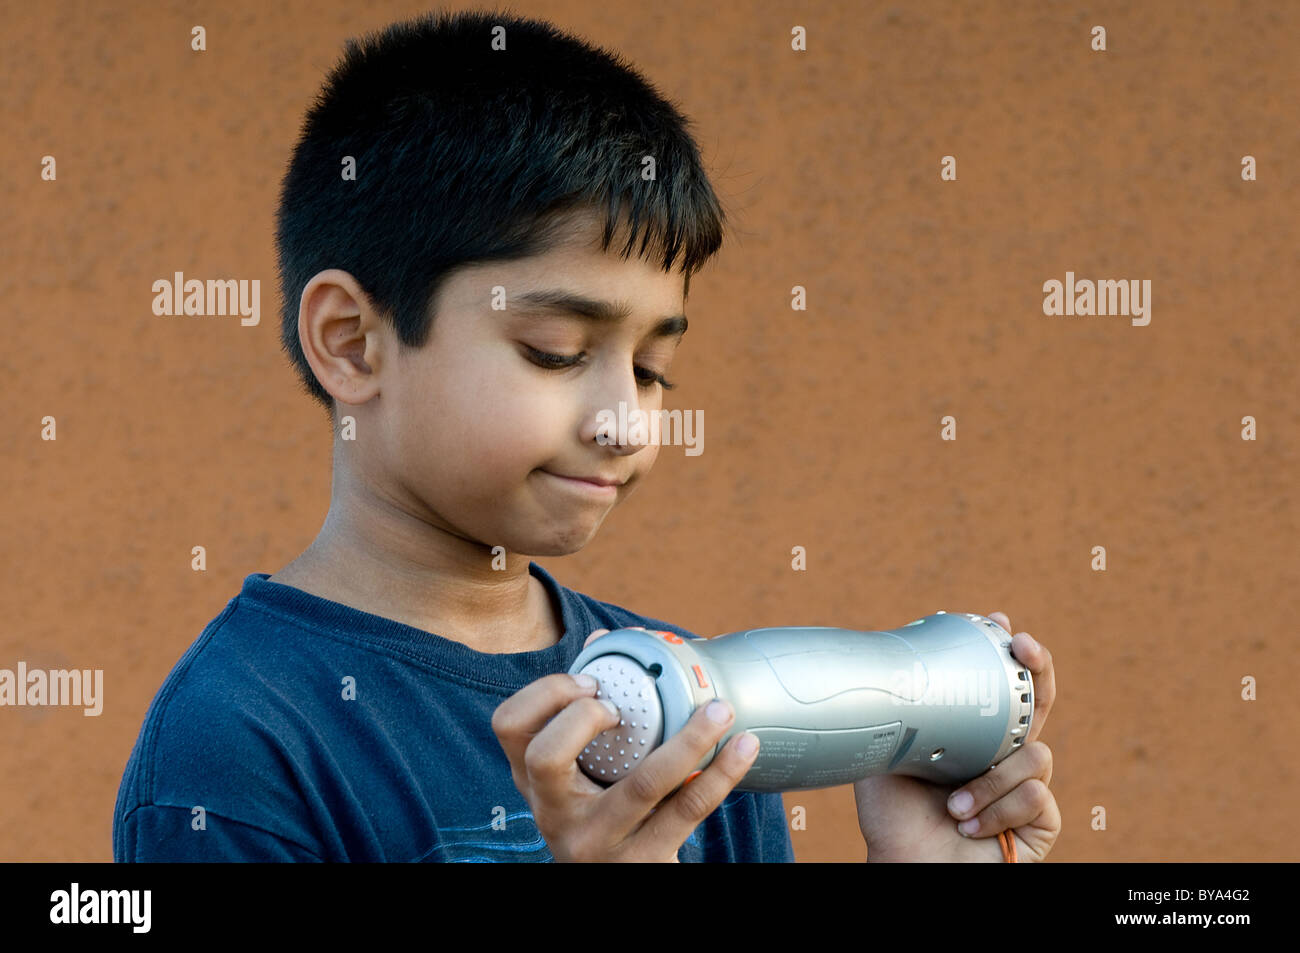 7 addict addiction boy caucasian child computer console controller cyberspace emotion entertainment excited expression fun game Stock Photo